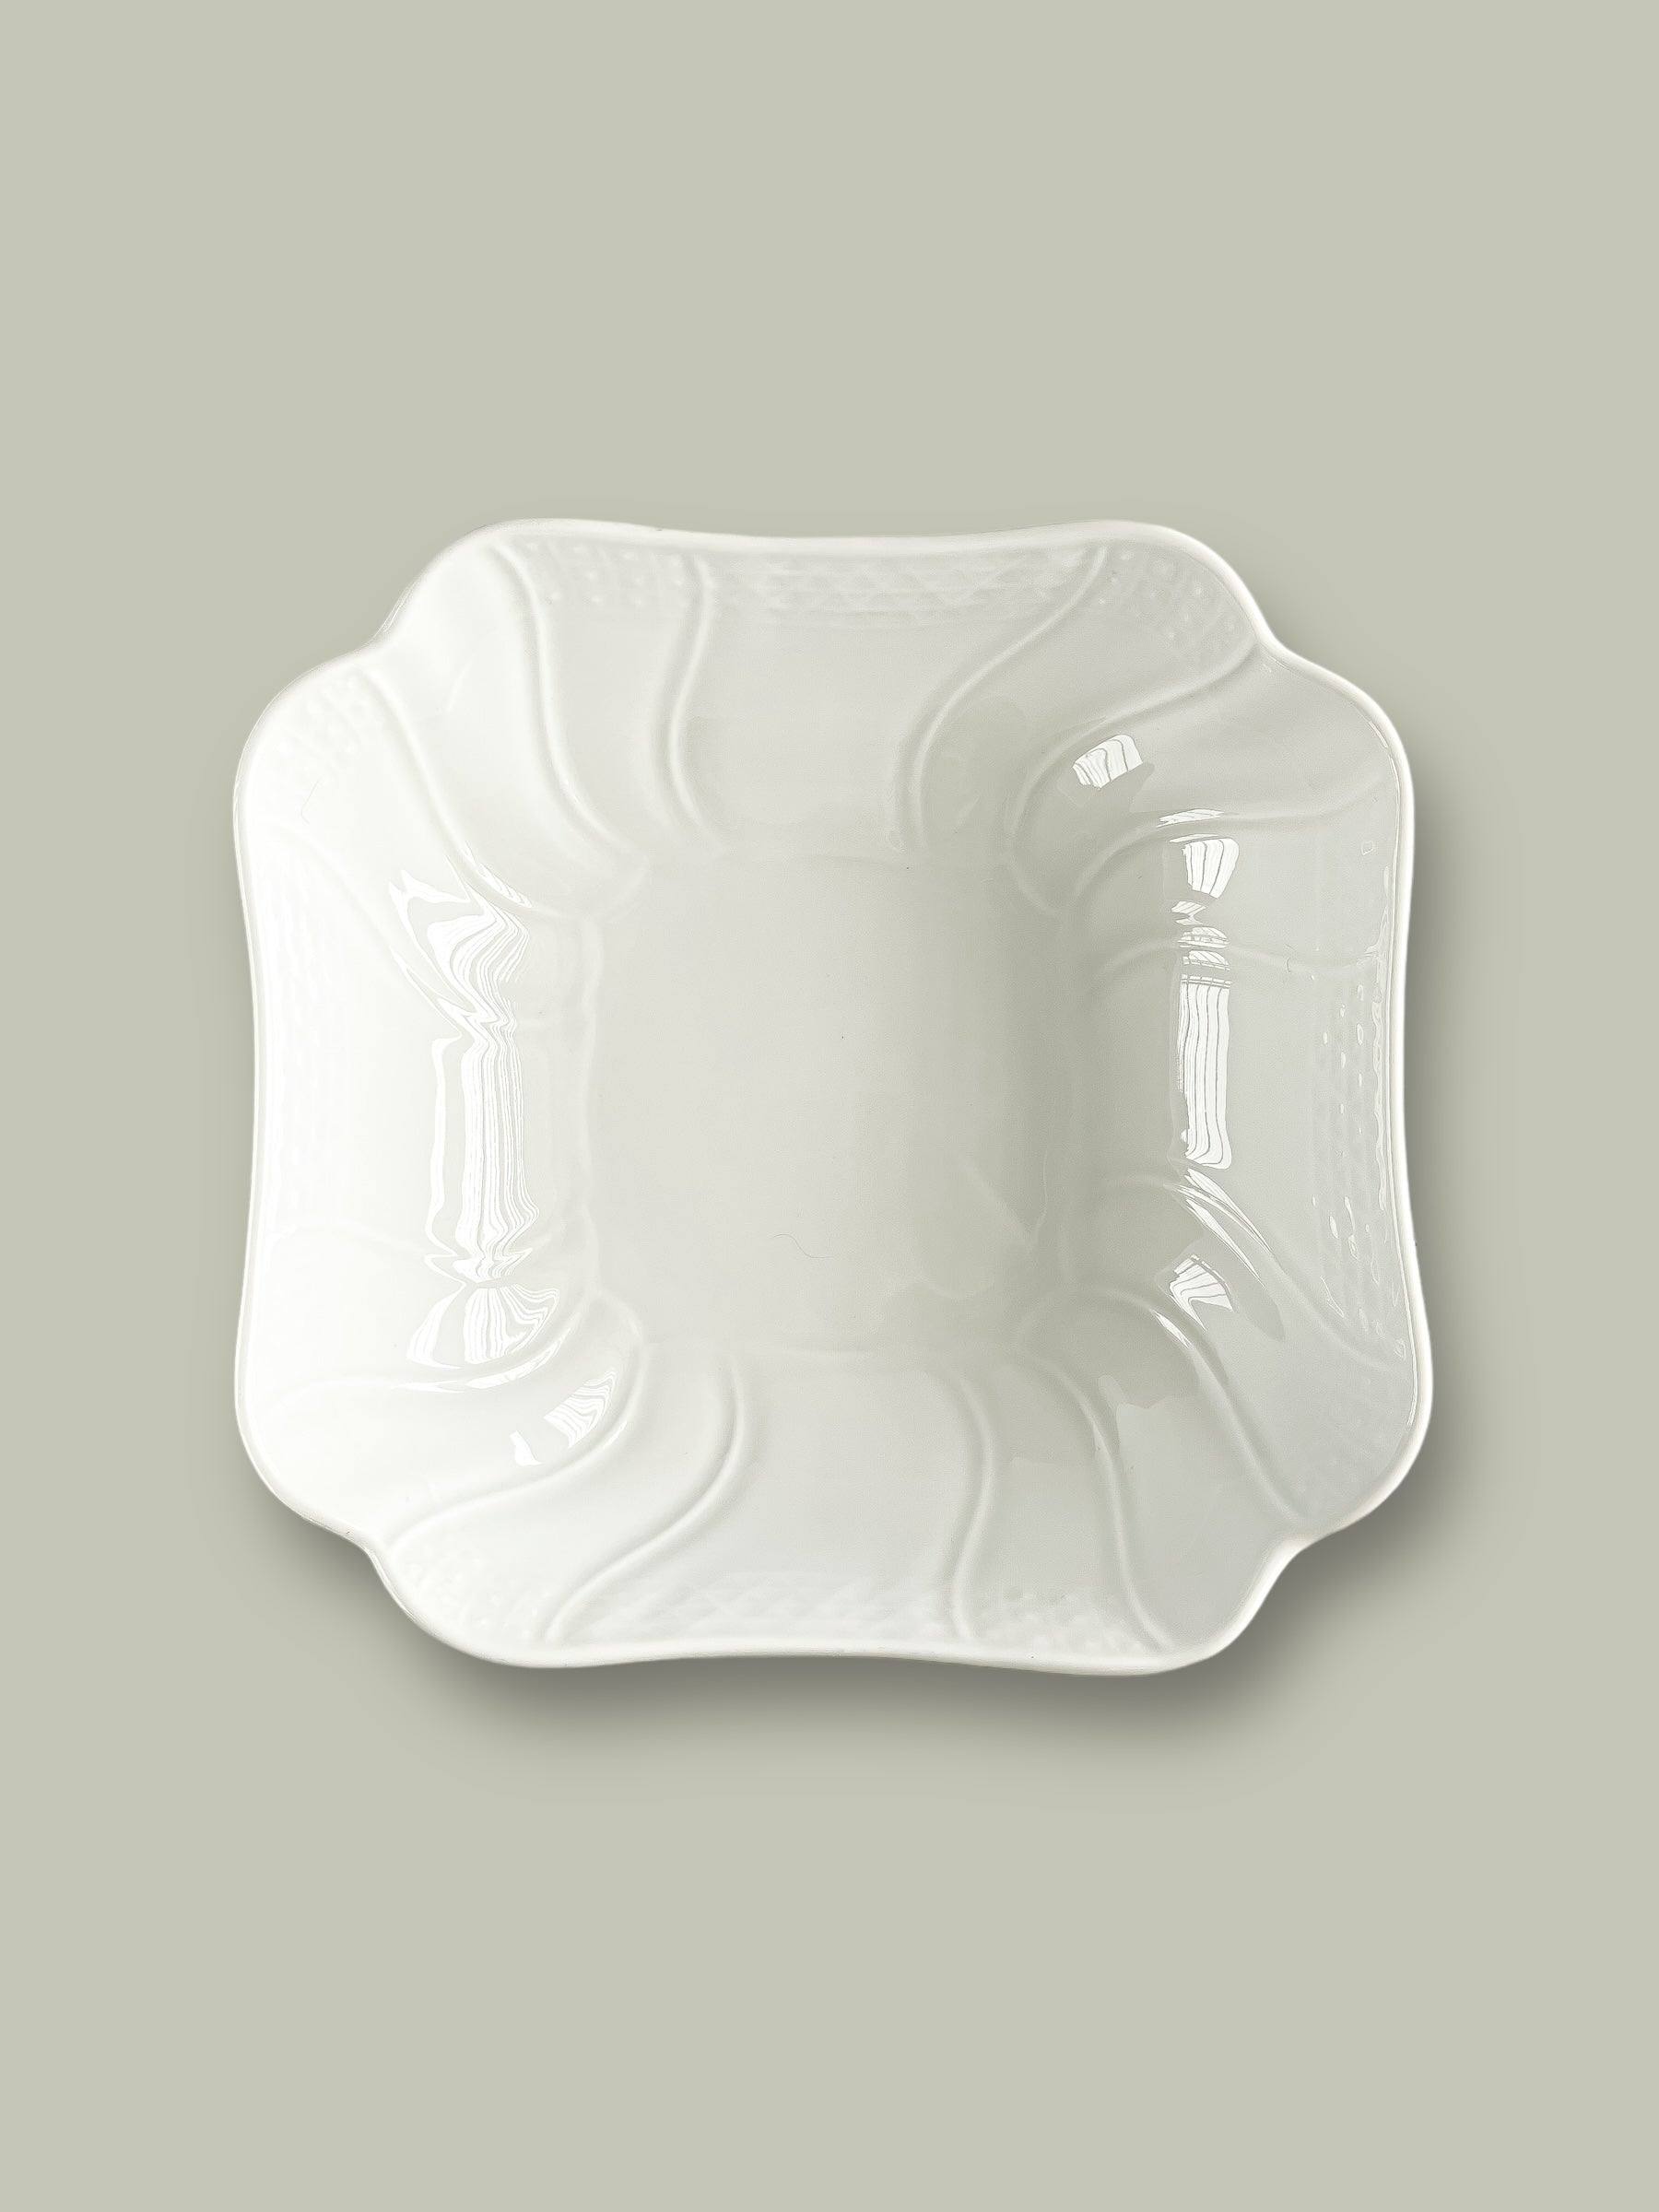 Hutschenreuther 19cm Square Vegetable/Salad Bowl - 'Dresden' Collection in White - SOSC Home